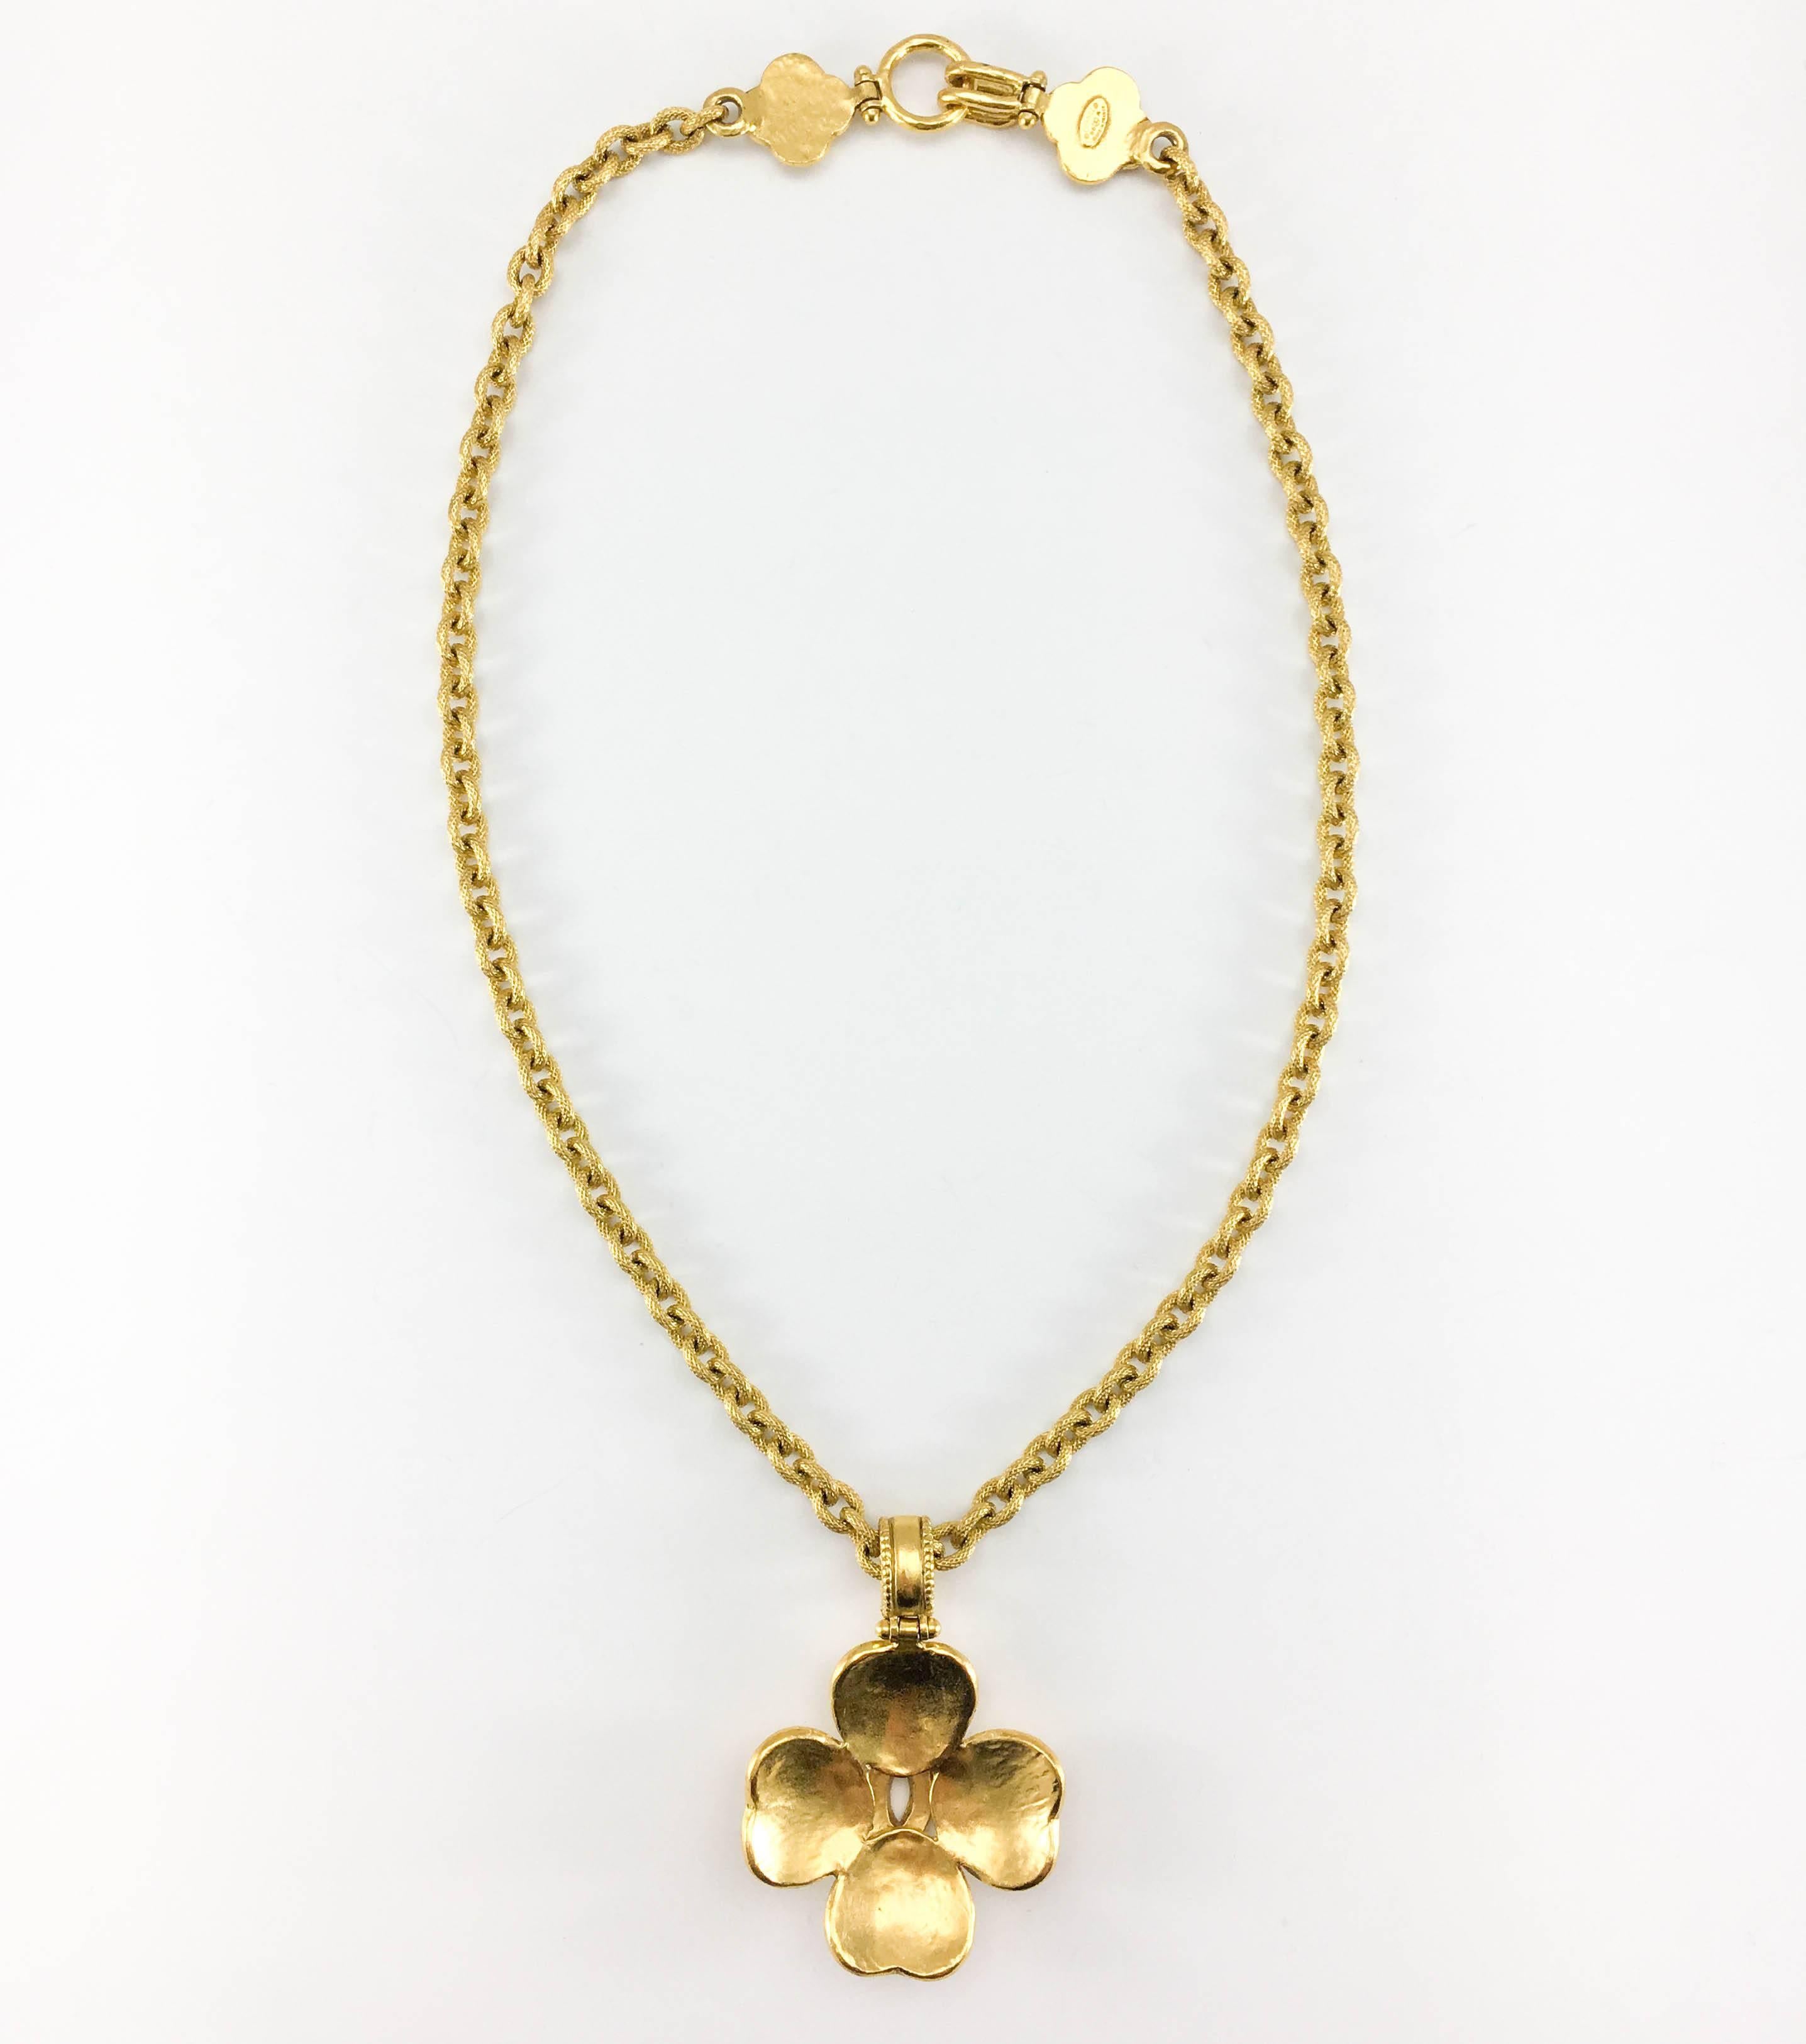 1996 Chanel Gold-Plated Clover-Shaped Logo Pendant Necklace For Sale 1